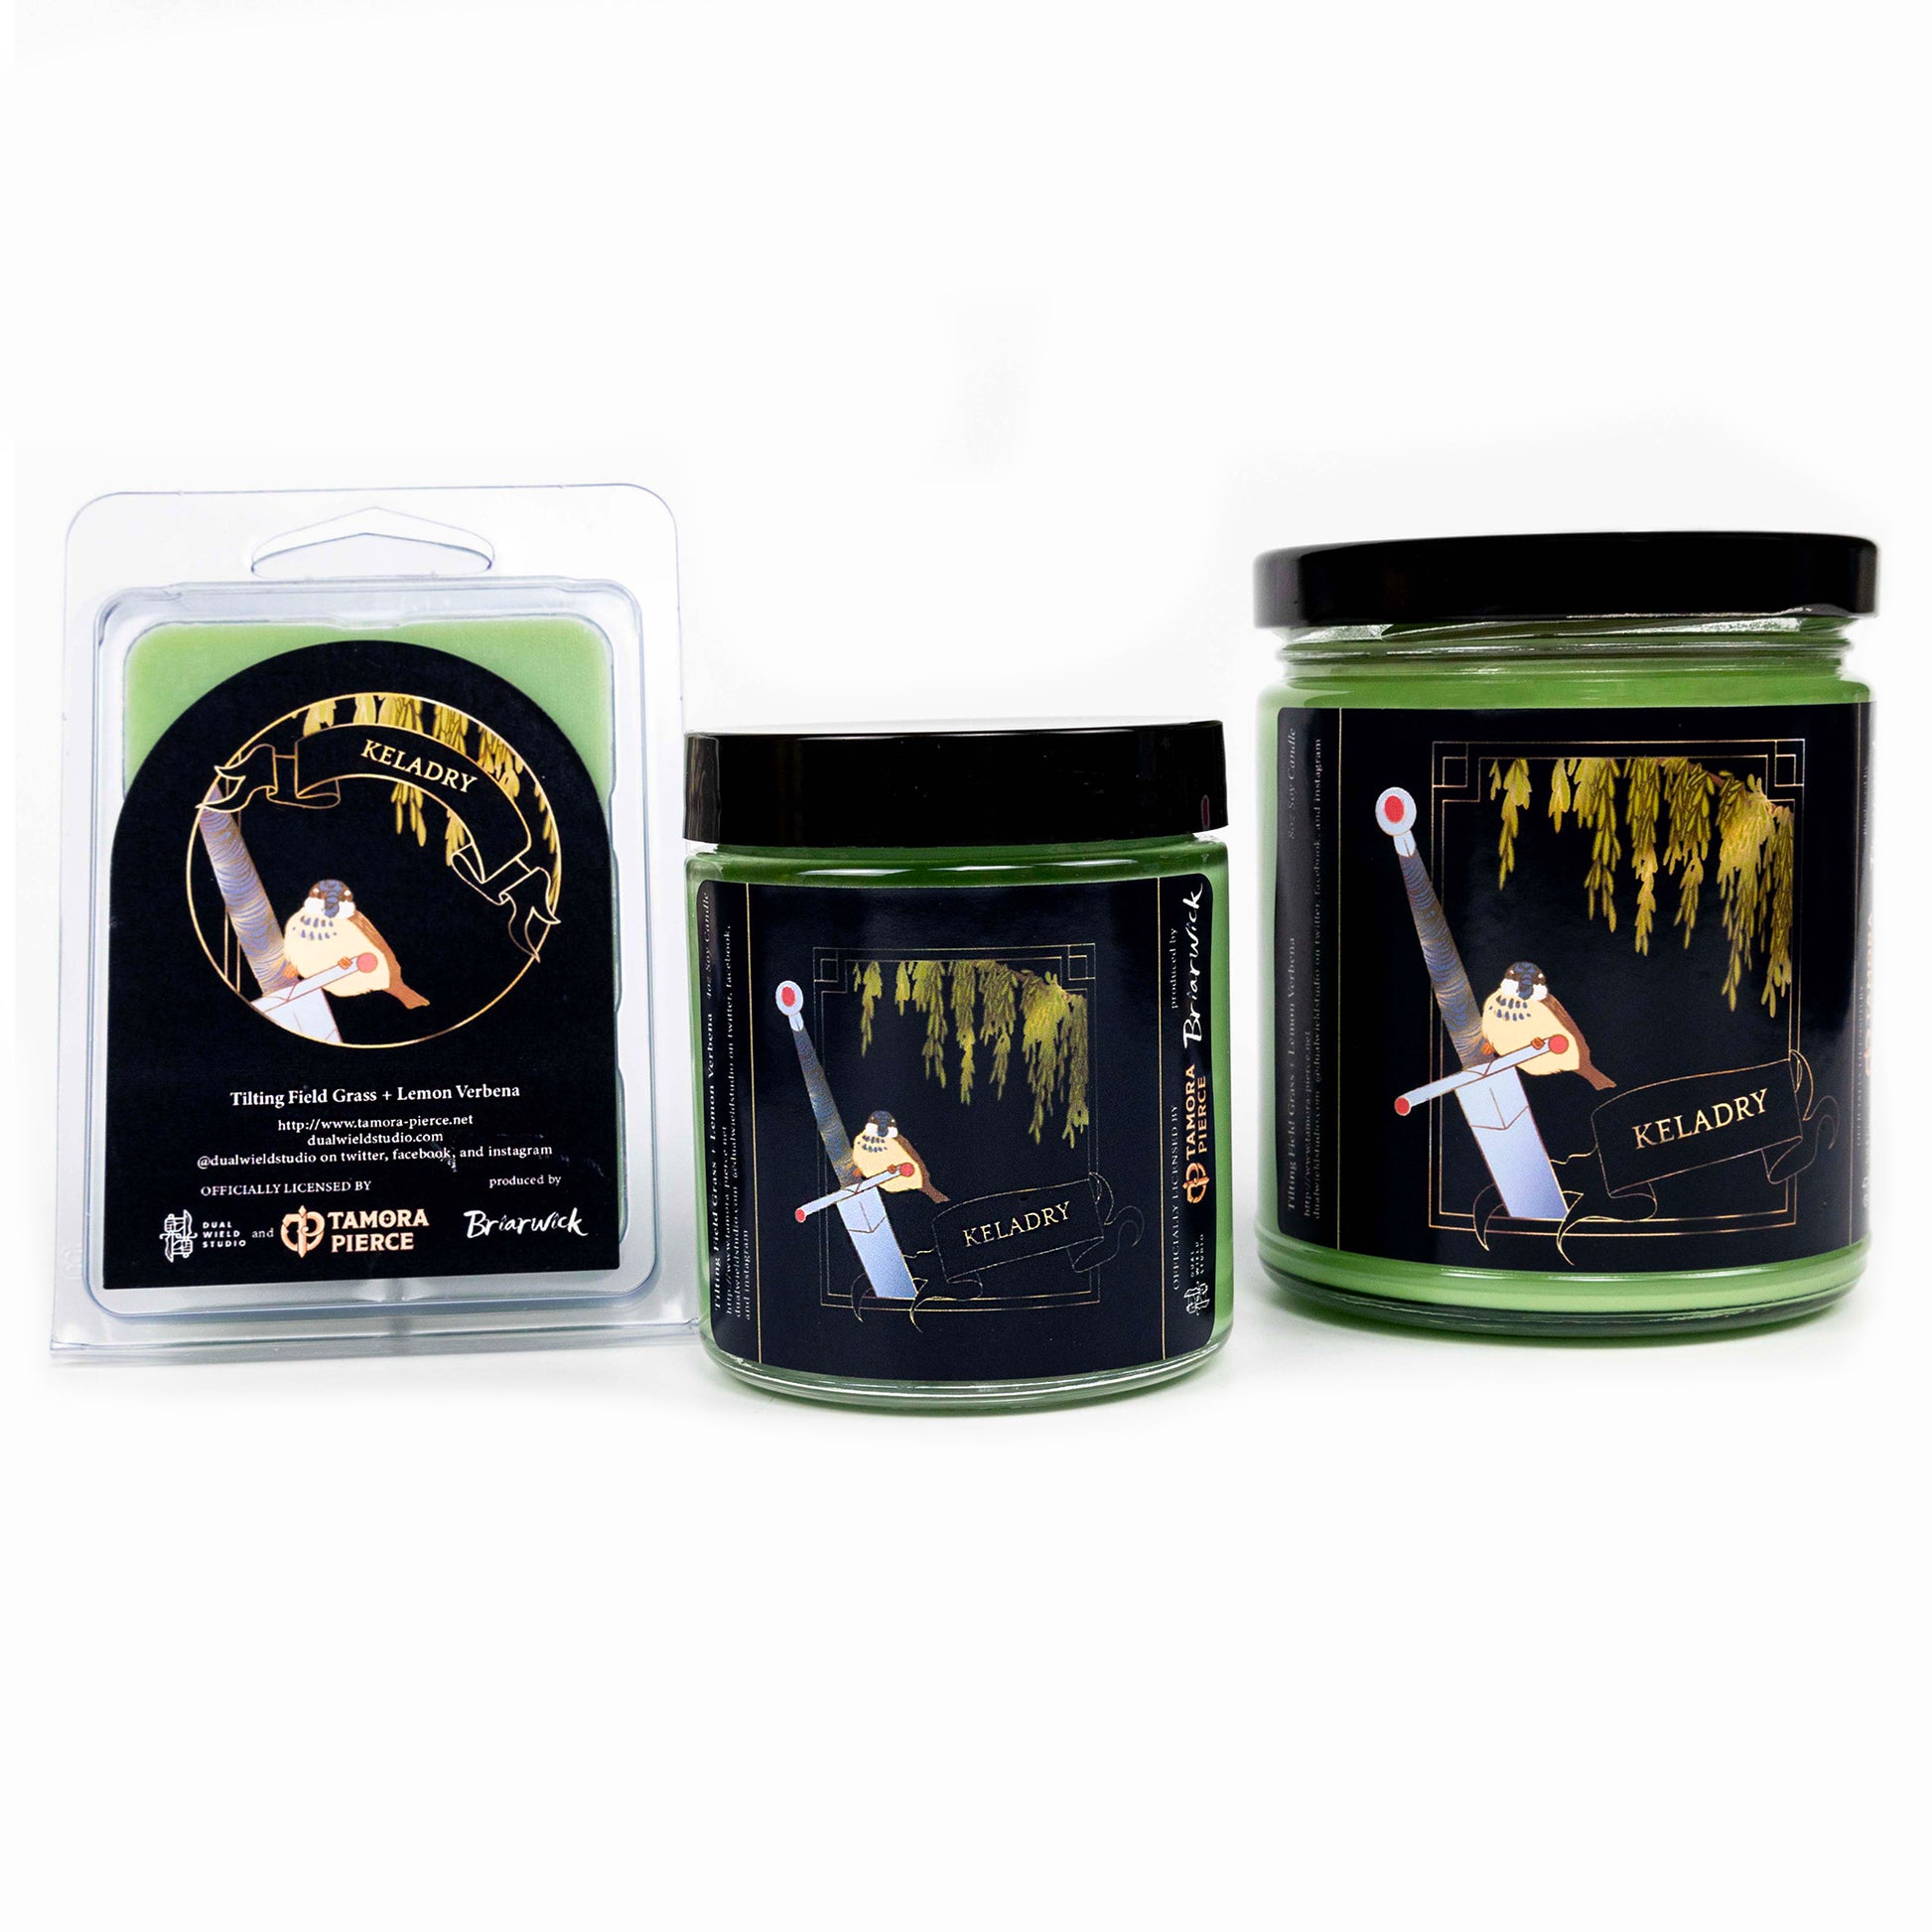 Full set of both Keladry candles and wax melts, all with kelly green wax. The label illustration shows a sparrow perchesd on the hilt of a longsword beside a willow tree. "Keladry" is written along a ribbon to the bottom right corner.